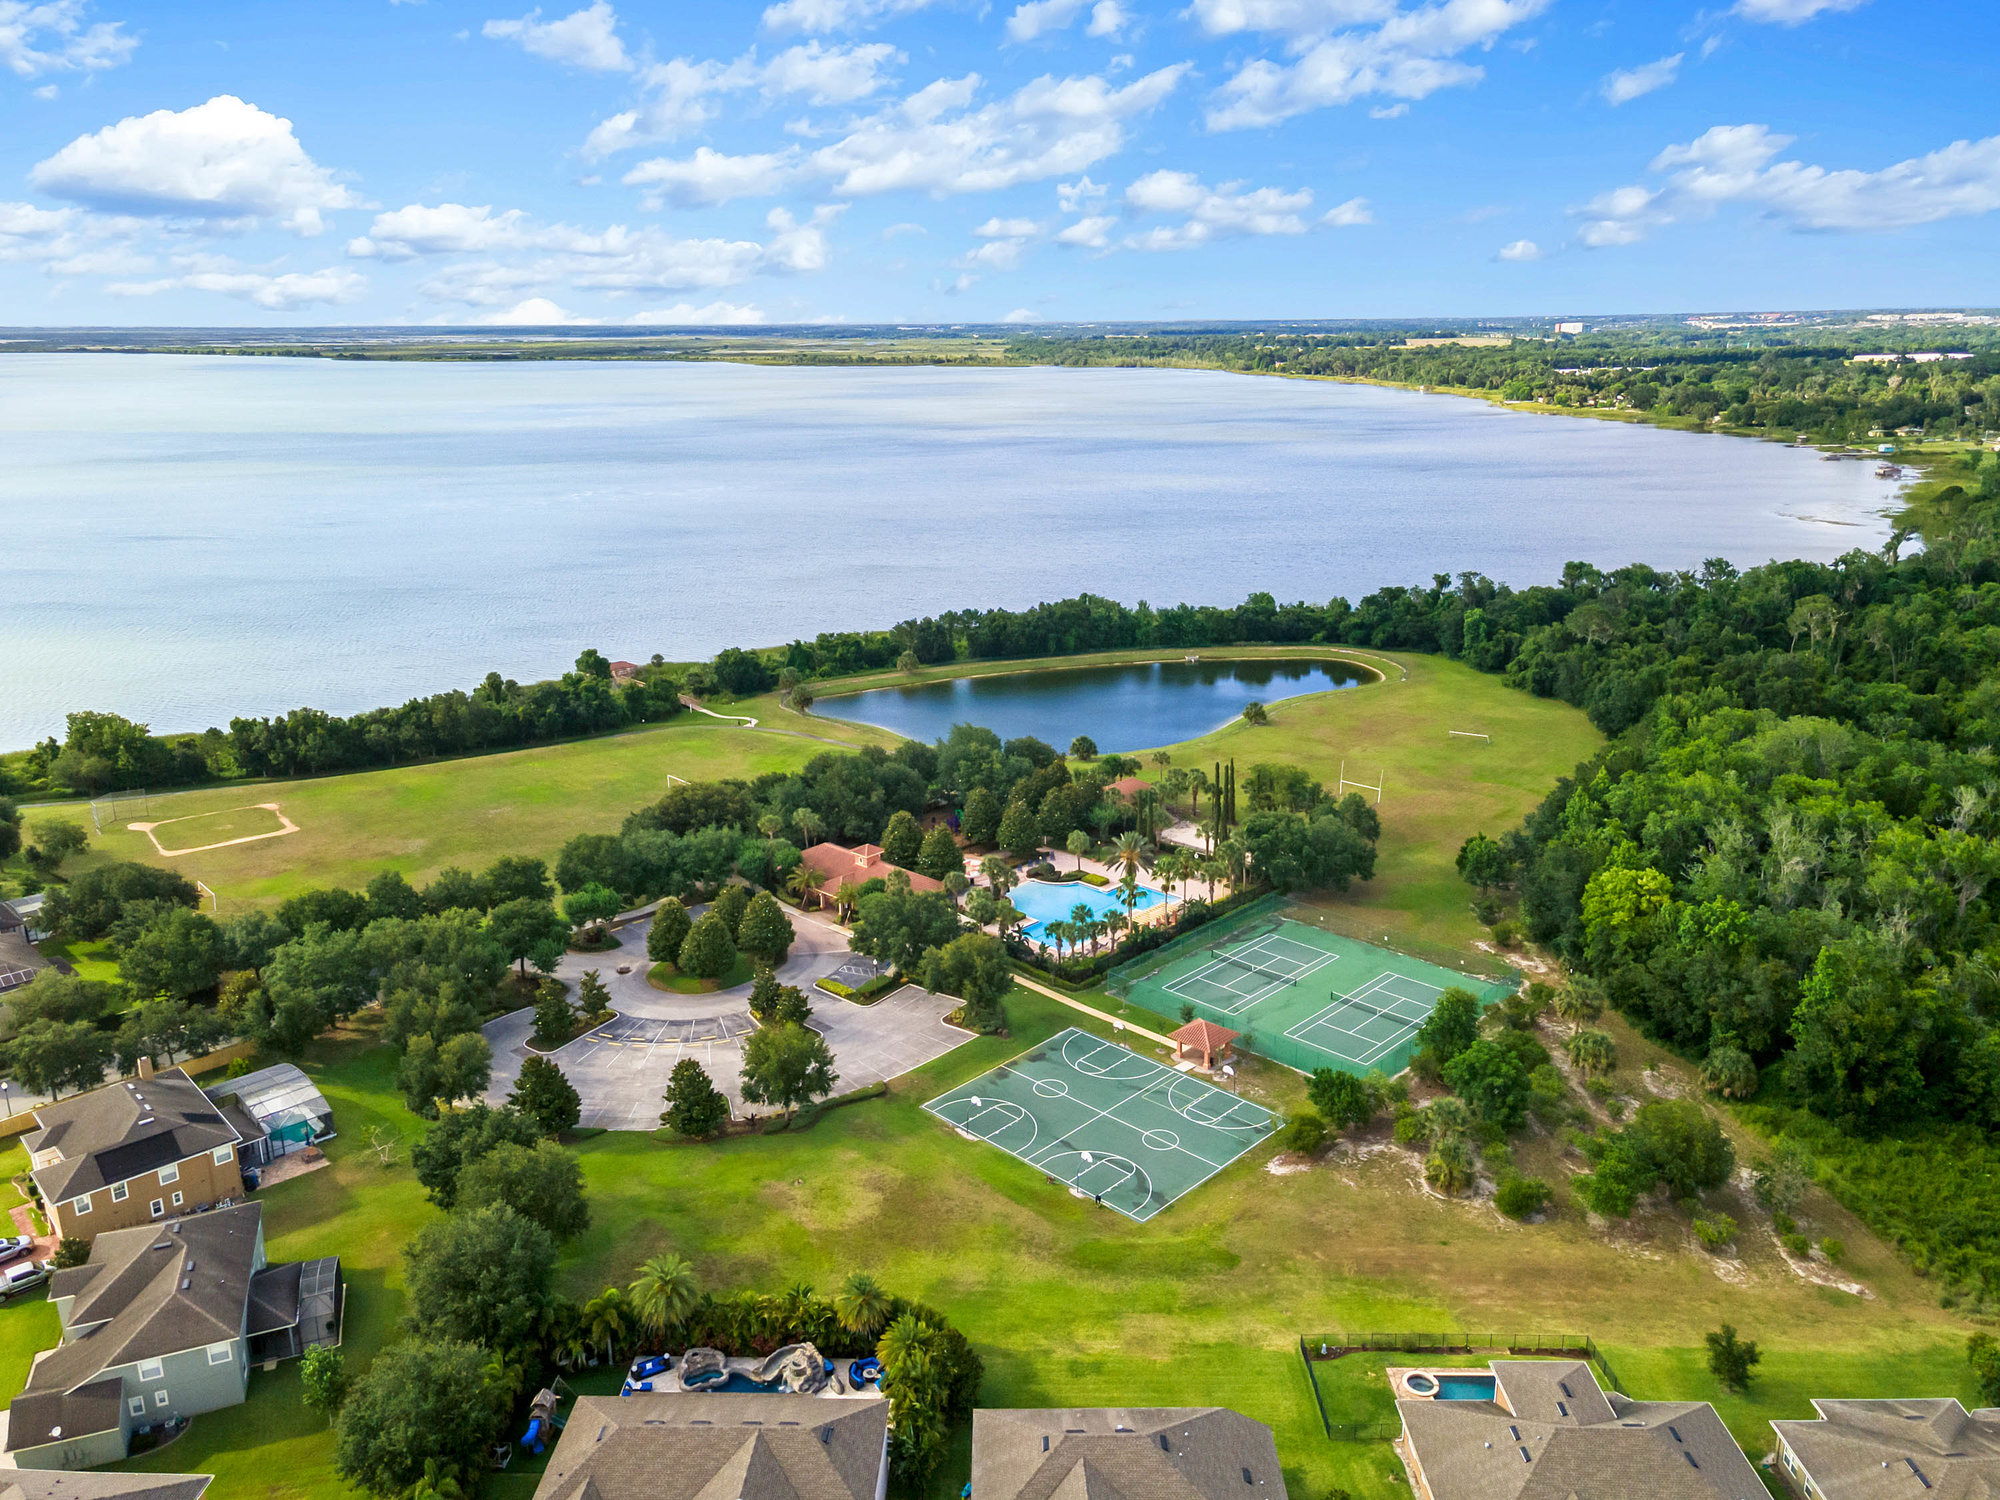 drone shot of lake and community clubhouse with houses